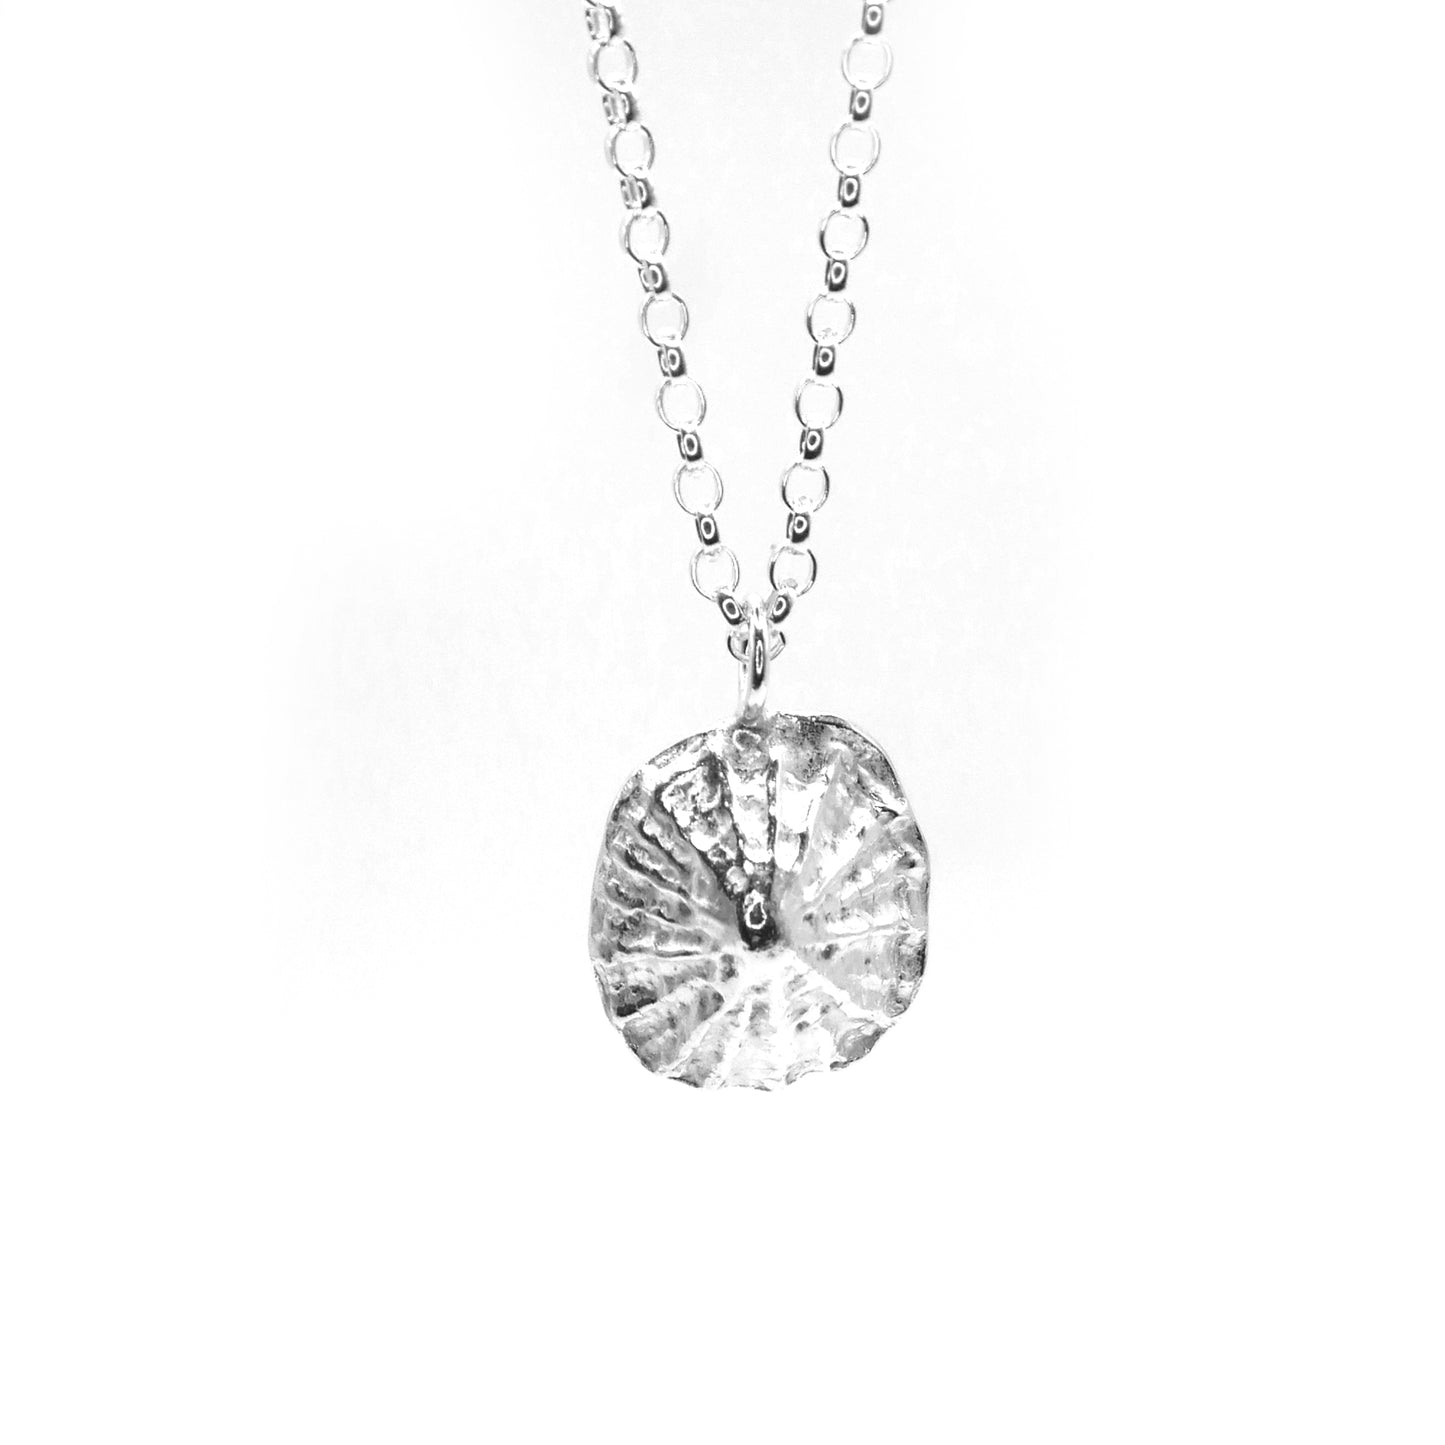 Warkworth Maxi Limpet Necklace